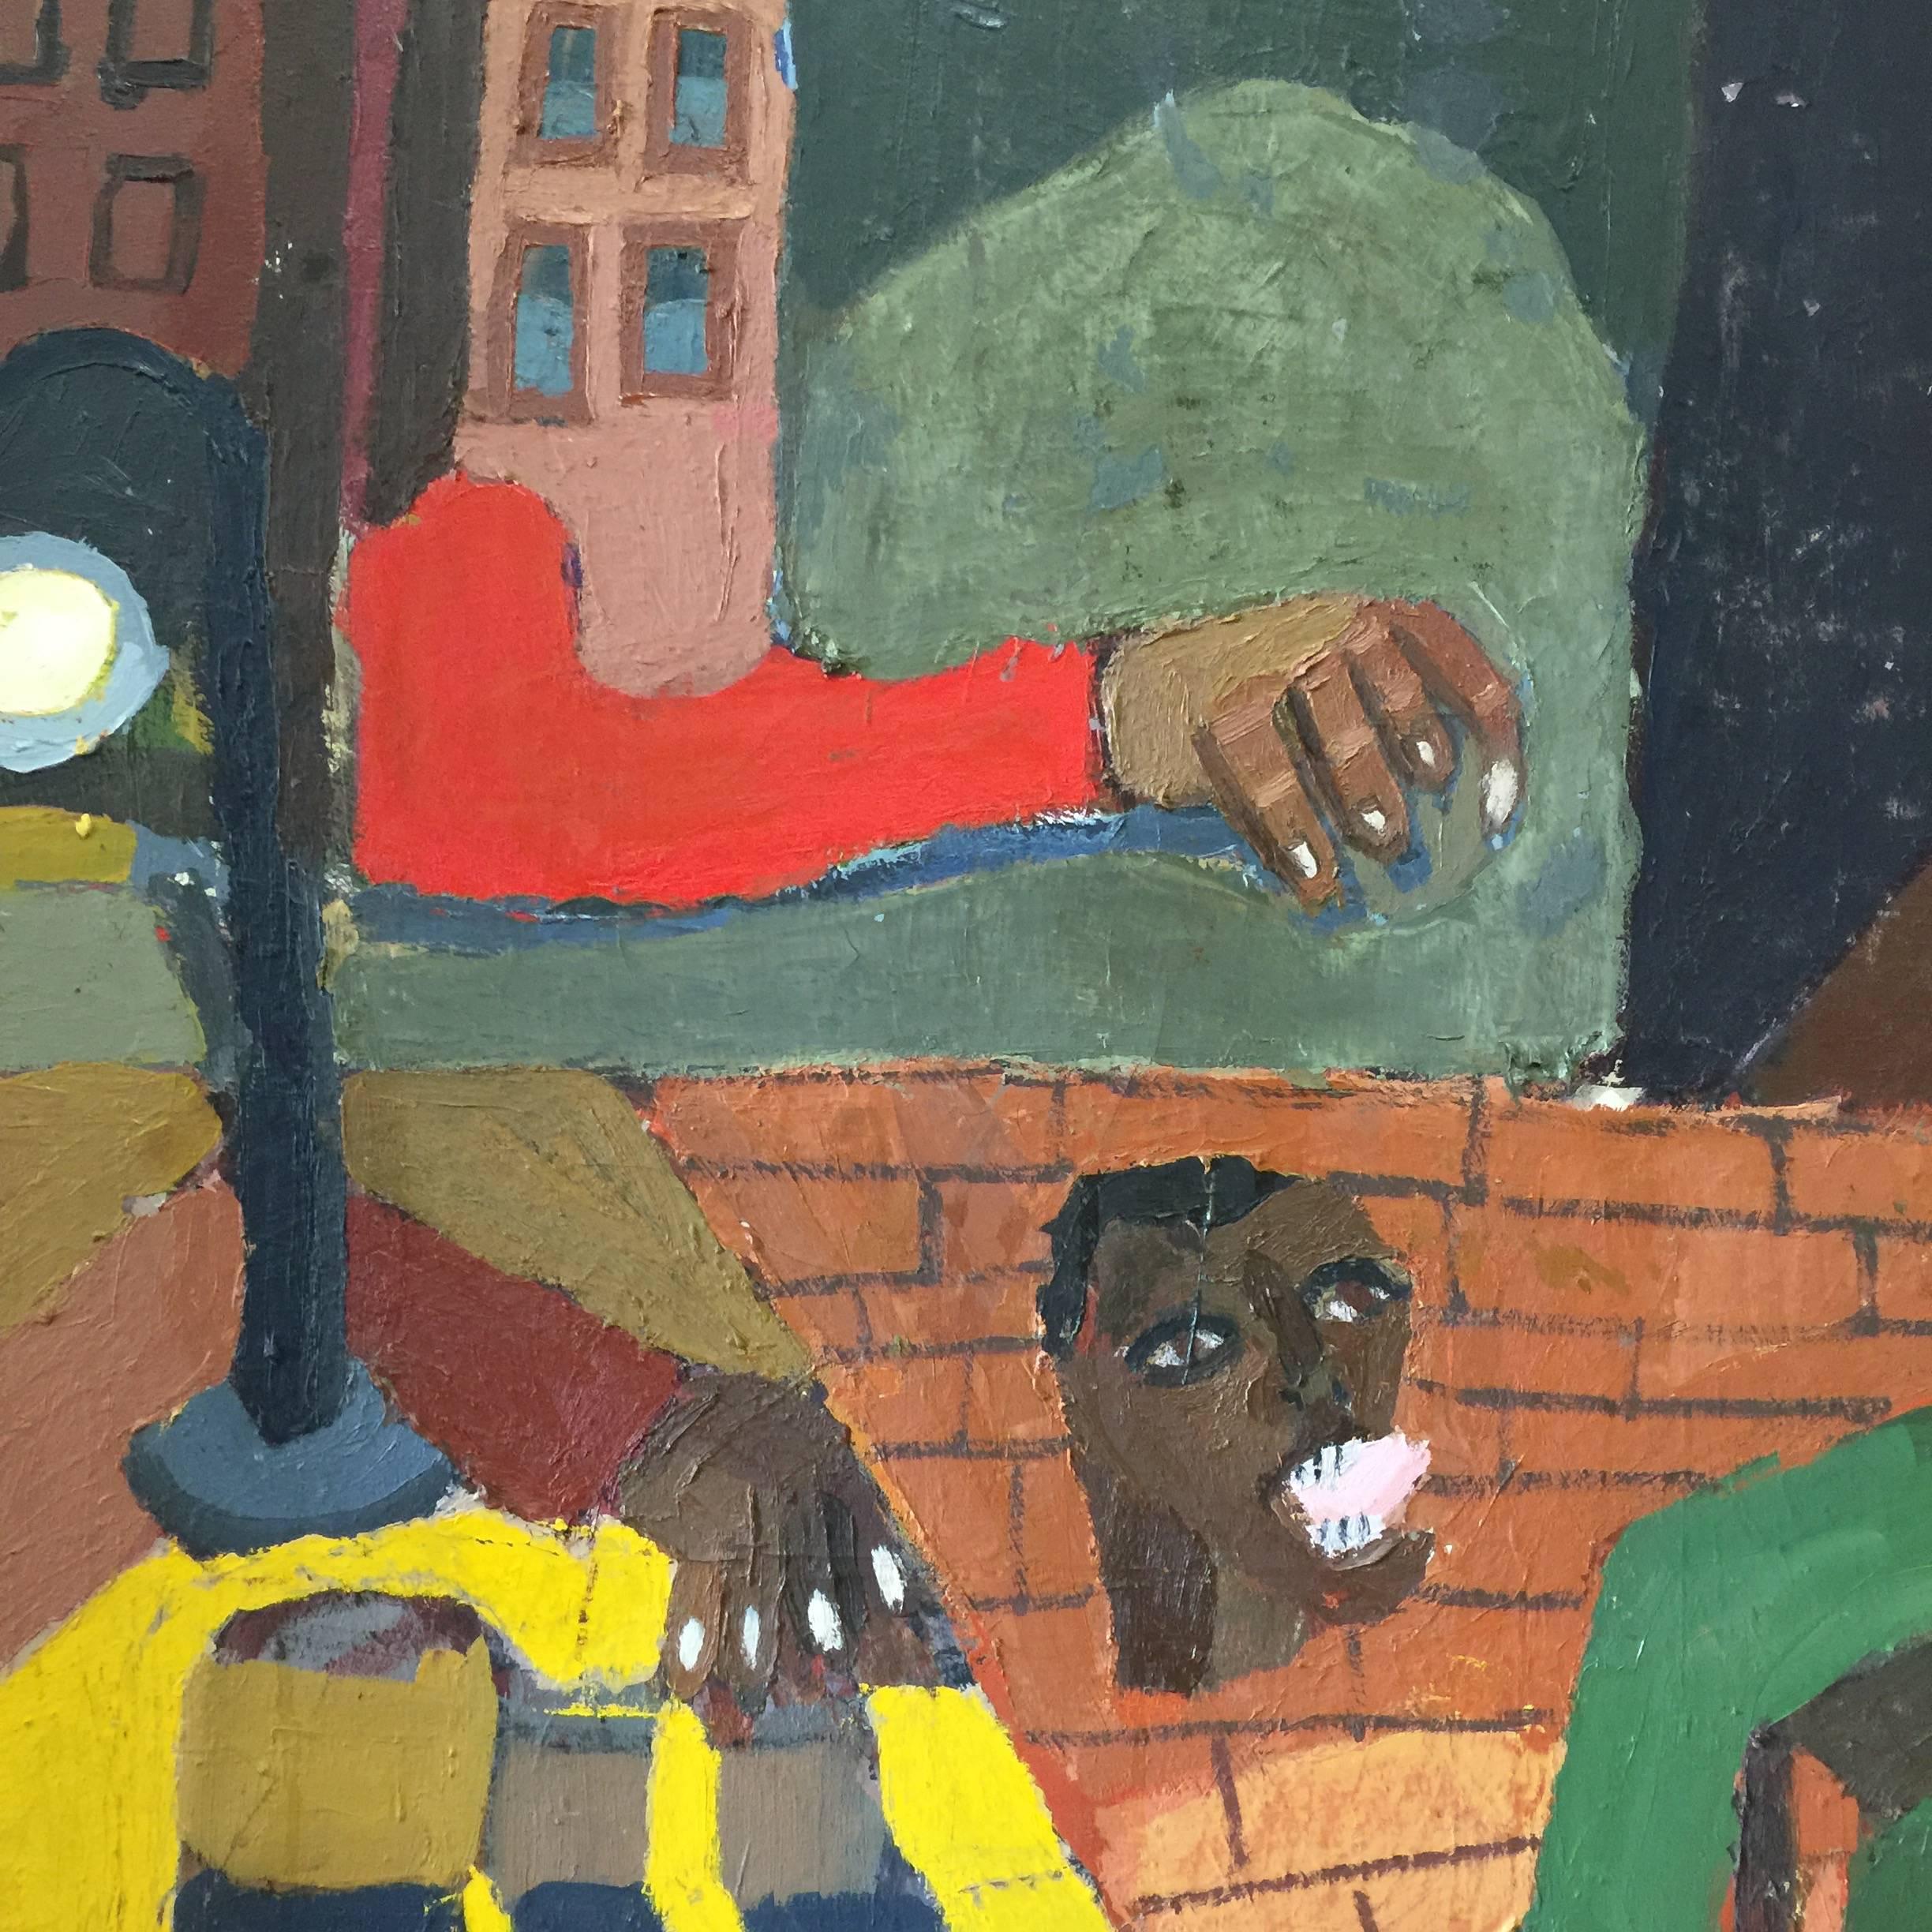 Painted Feeling Displaced in Harlem Painting by New York City Artist Clintel Steed, 2001 For Sale